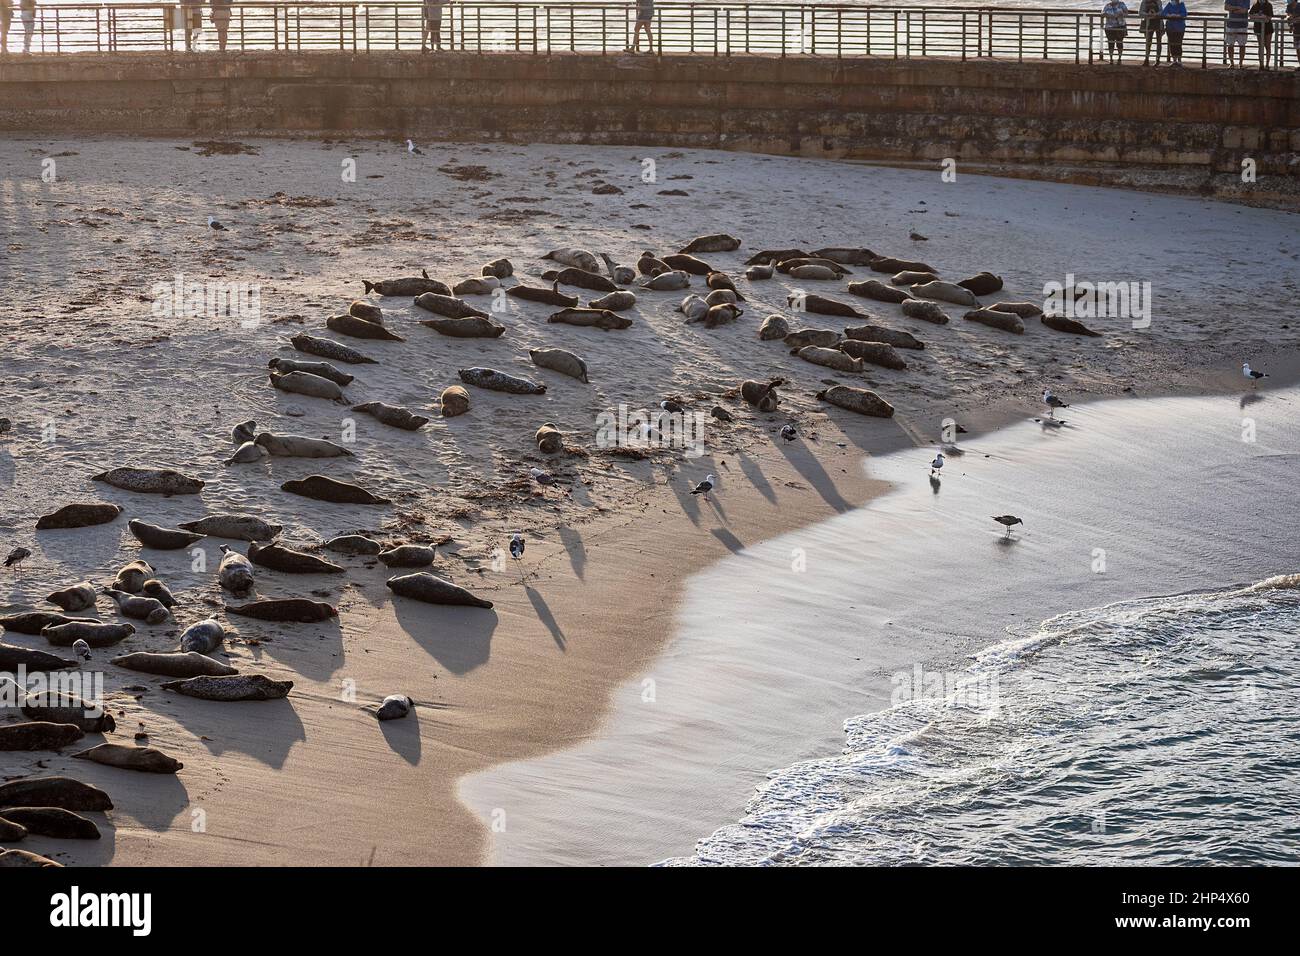 group of Pacific harbor seals snoozing on a small beach in La Jolla California with tourists on a walkway in the background and gulls and surf in the Stock Photo